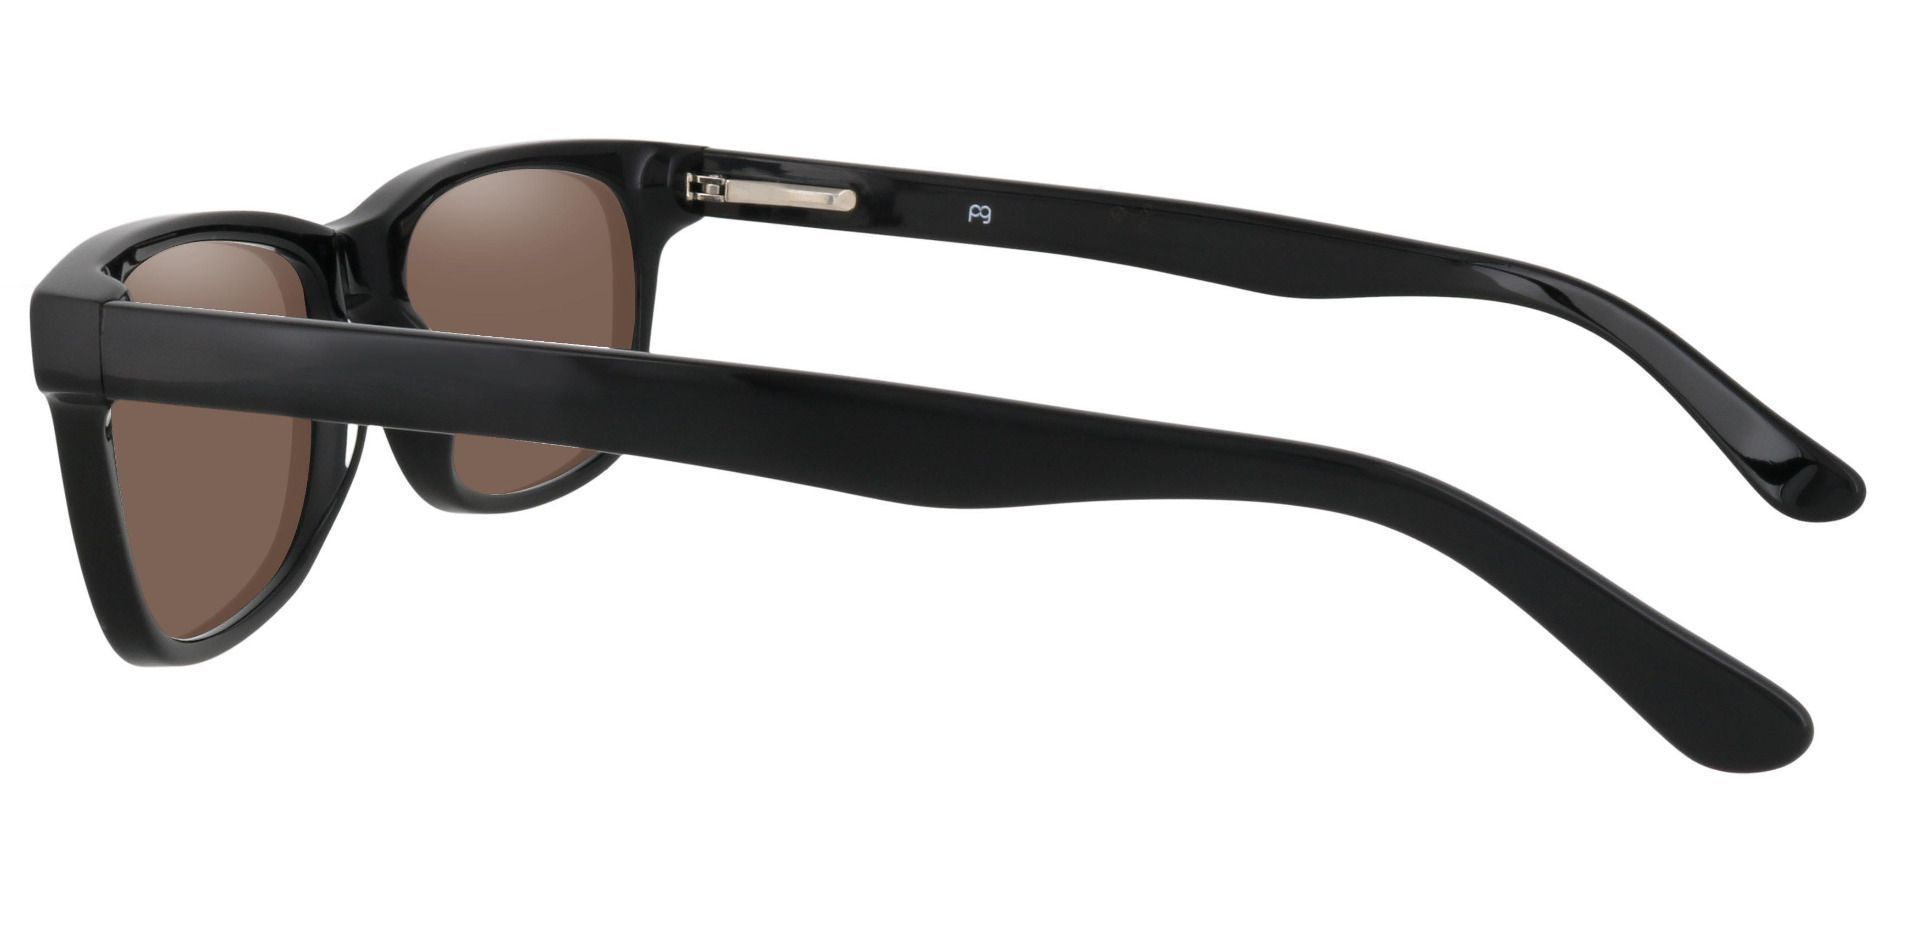 Hendrix Rectangle Non-Rx Sunglasses - Black Frame With Brown Lenses